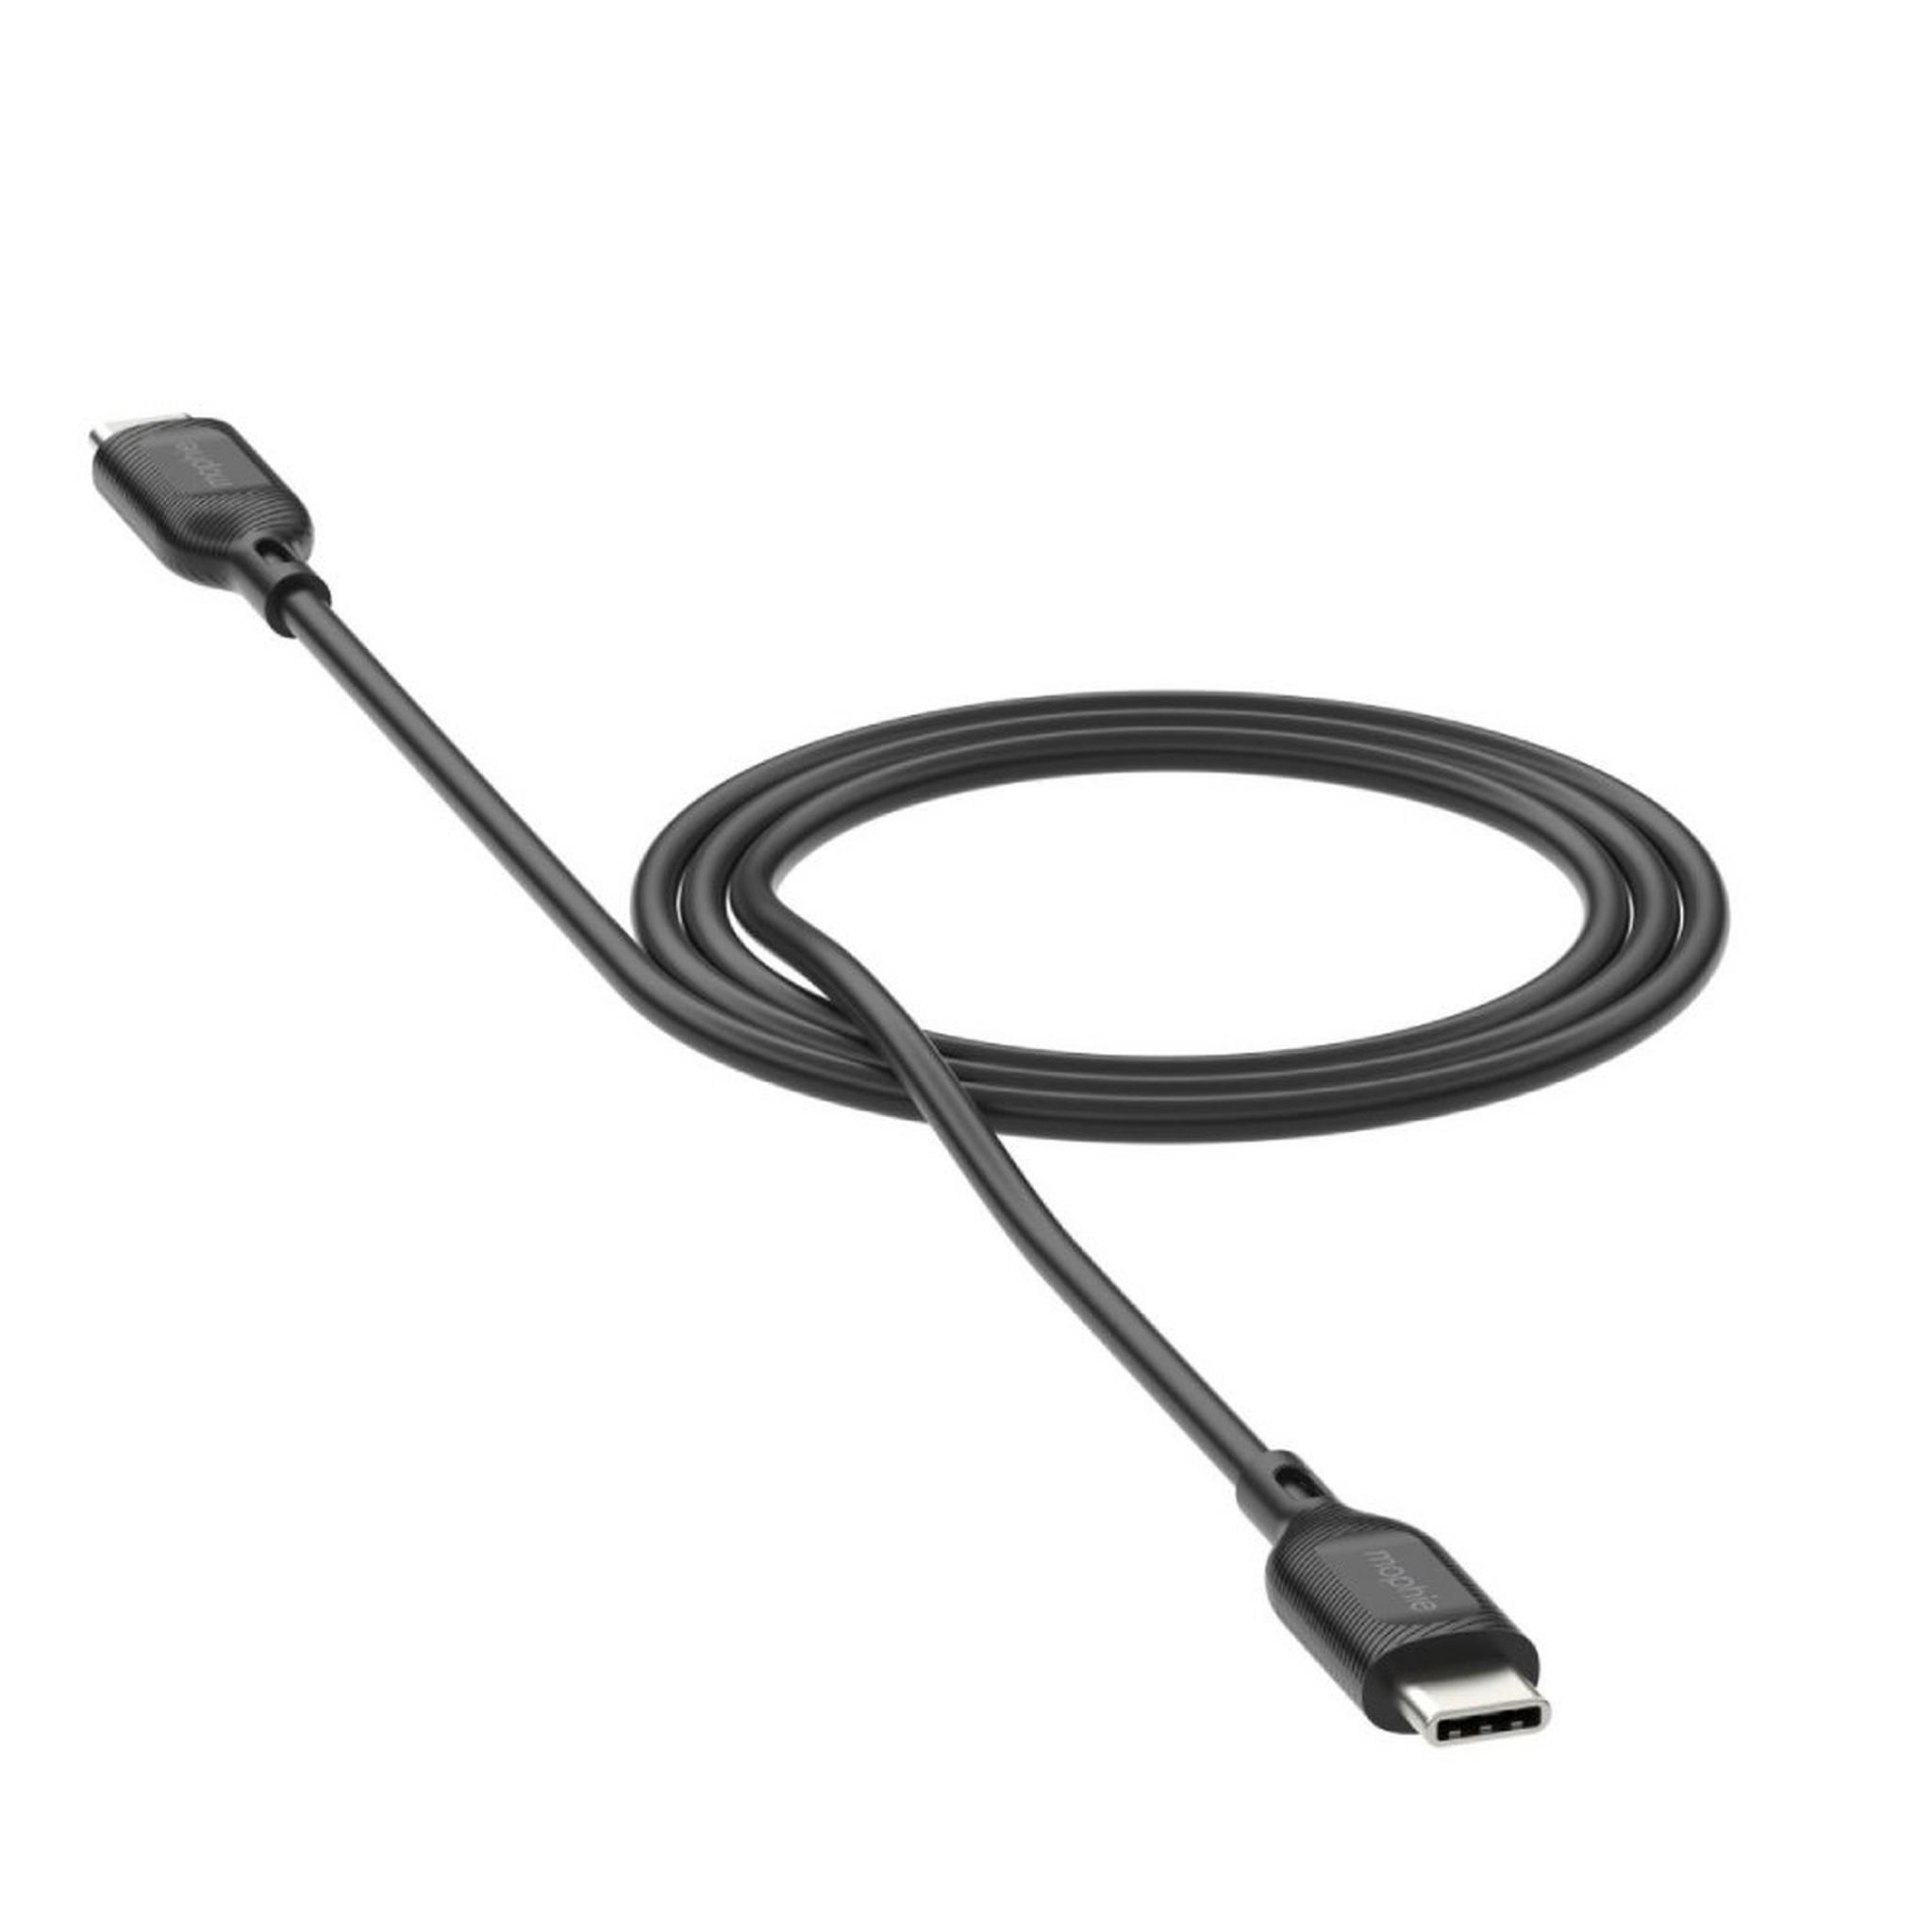 Mophie USB-C to USB-C Cable, 1M, 409911863 – Black